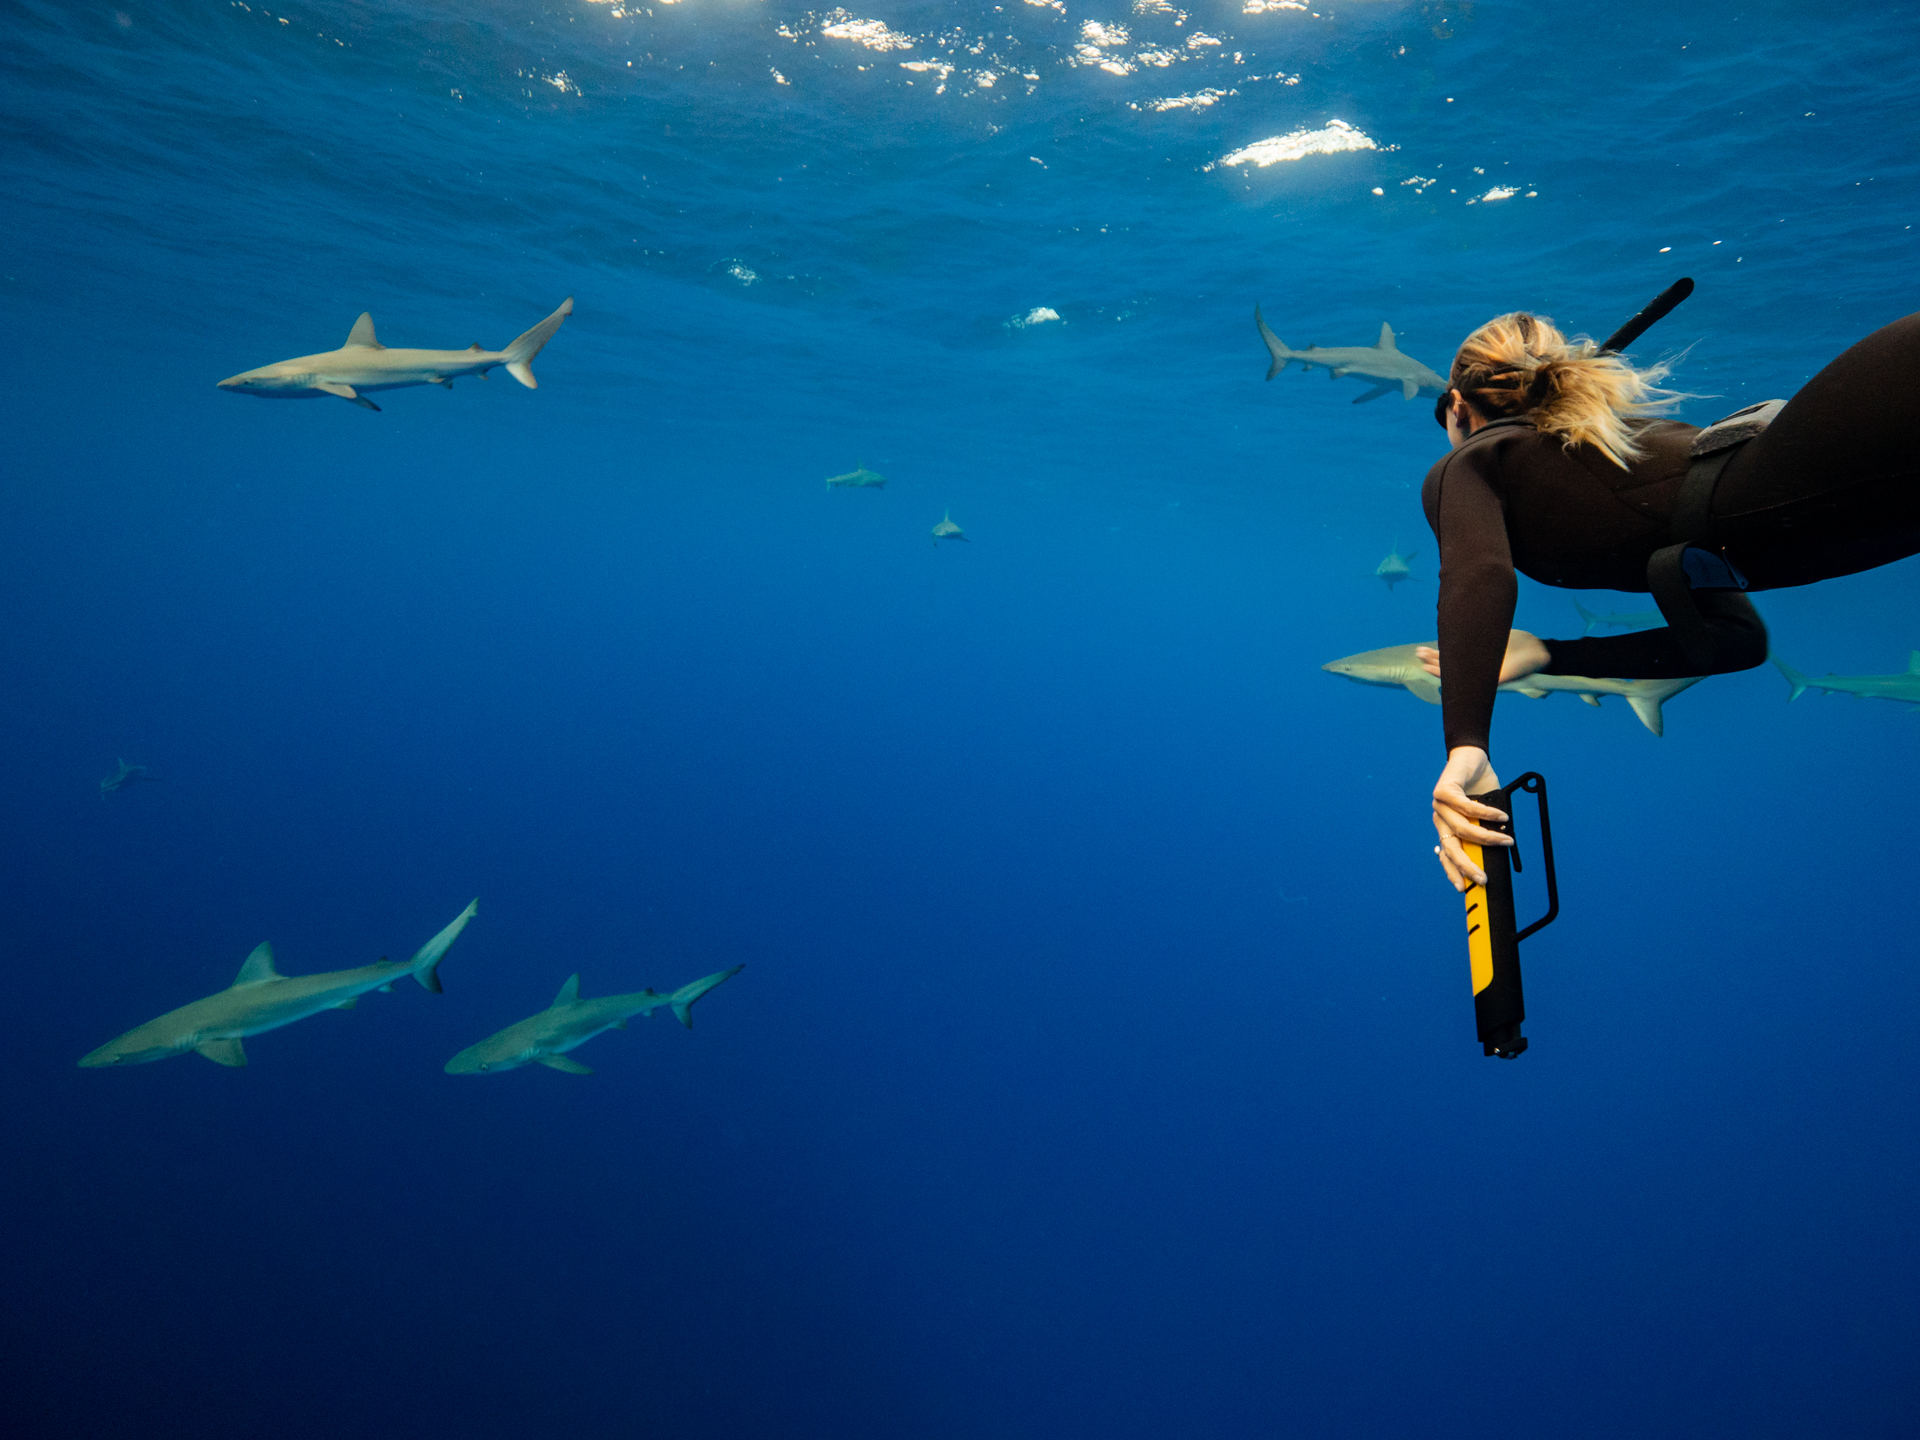 Snorkeling with sharks with the protection of the eSPEAR